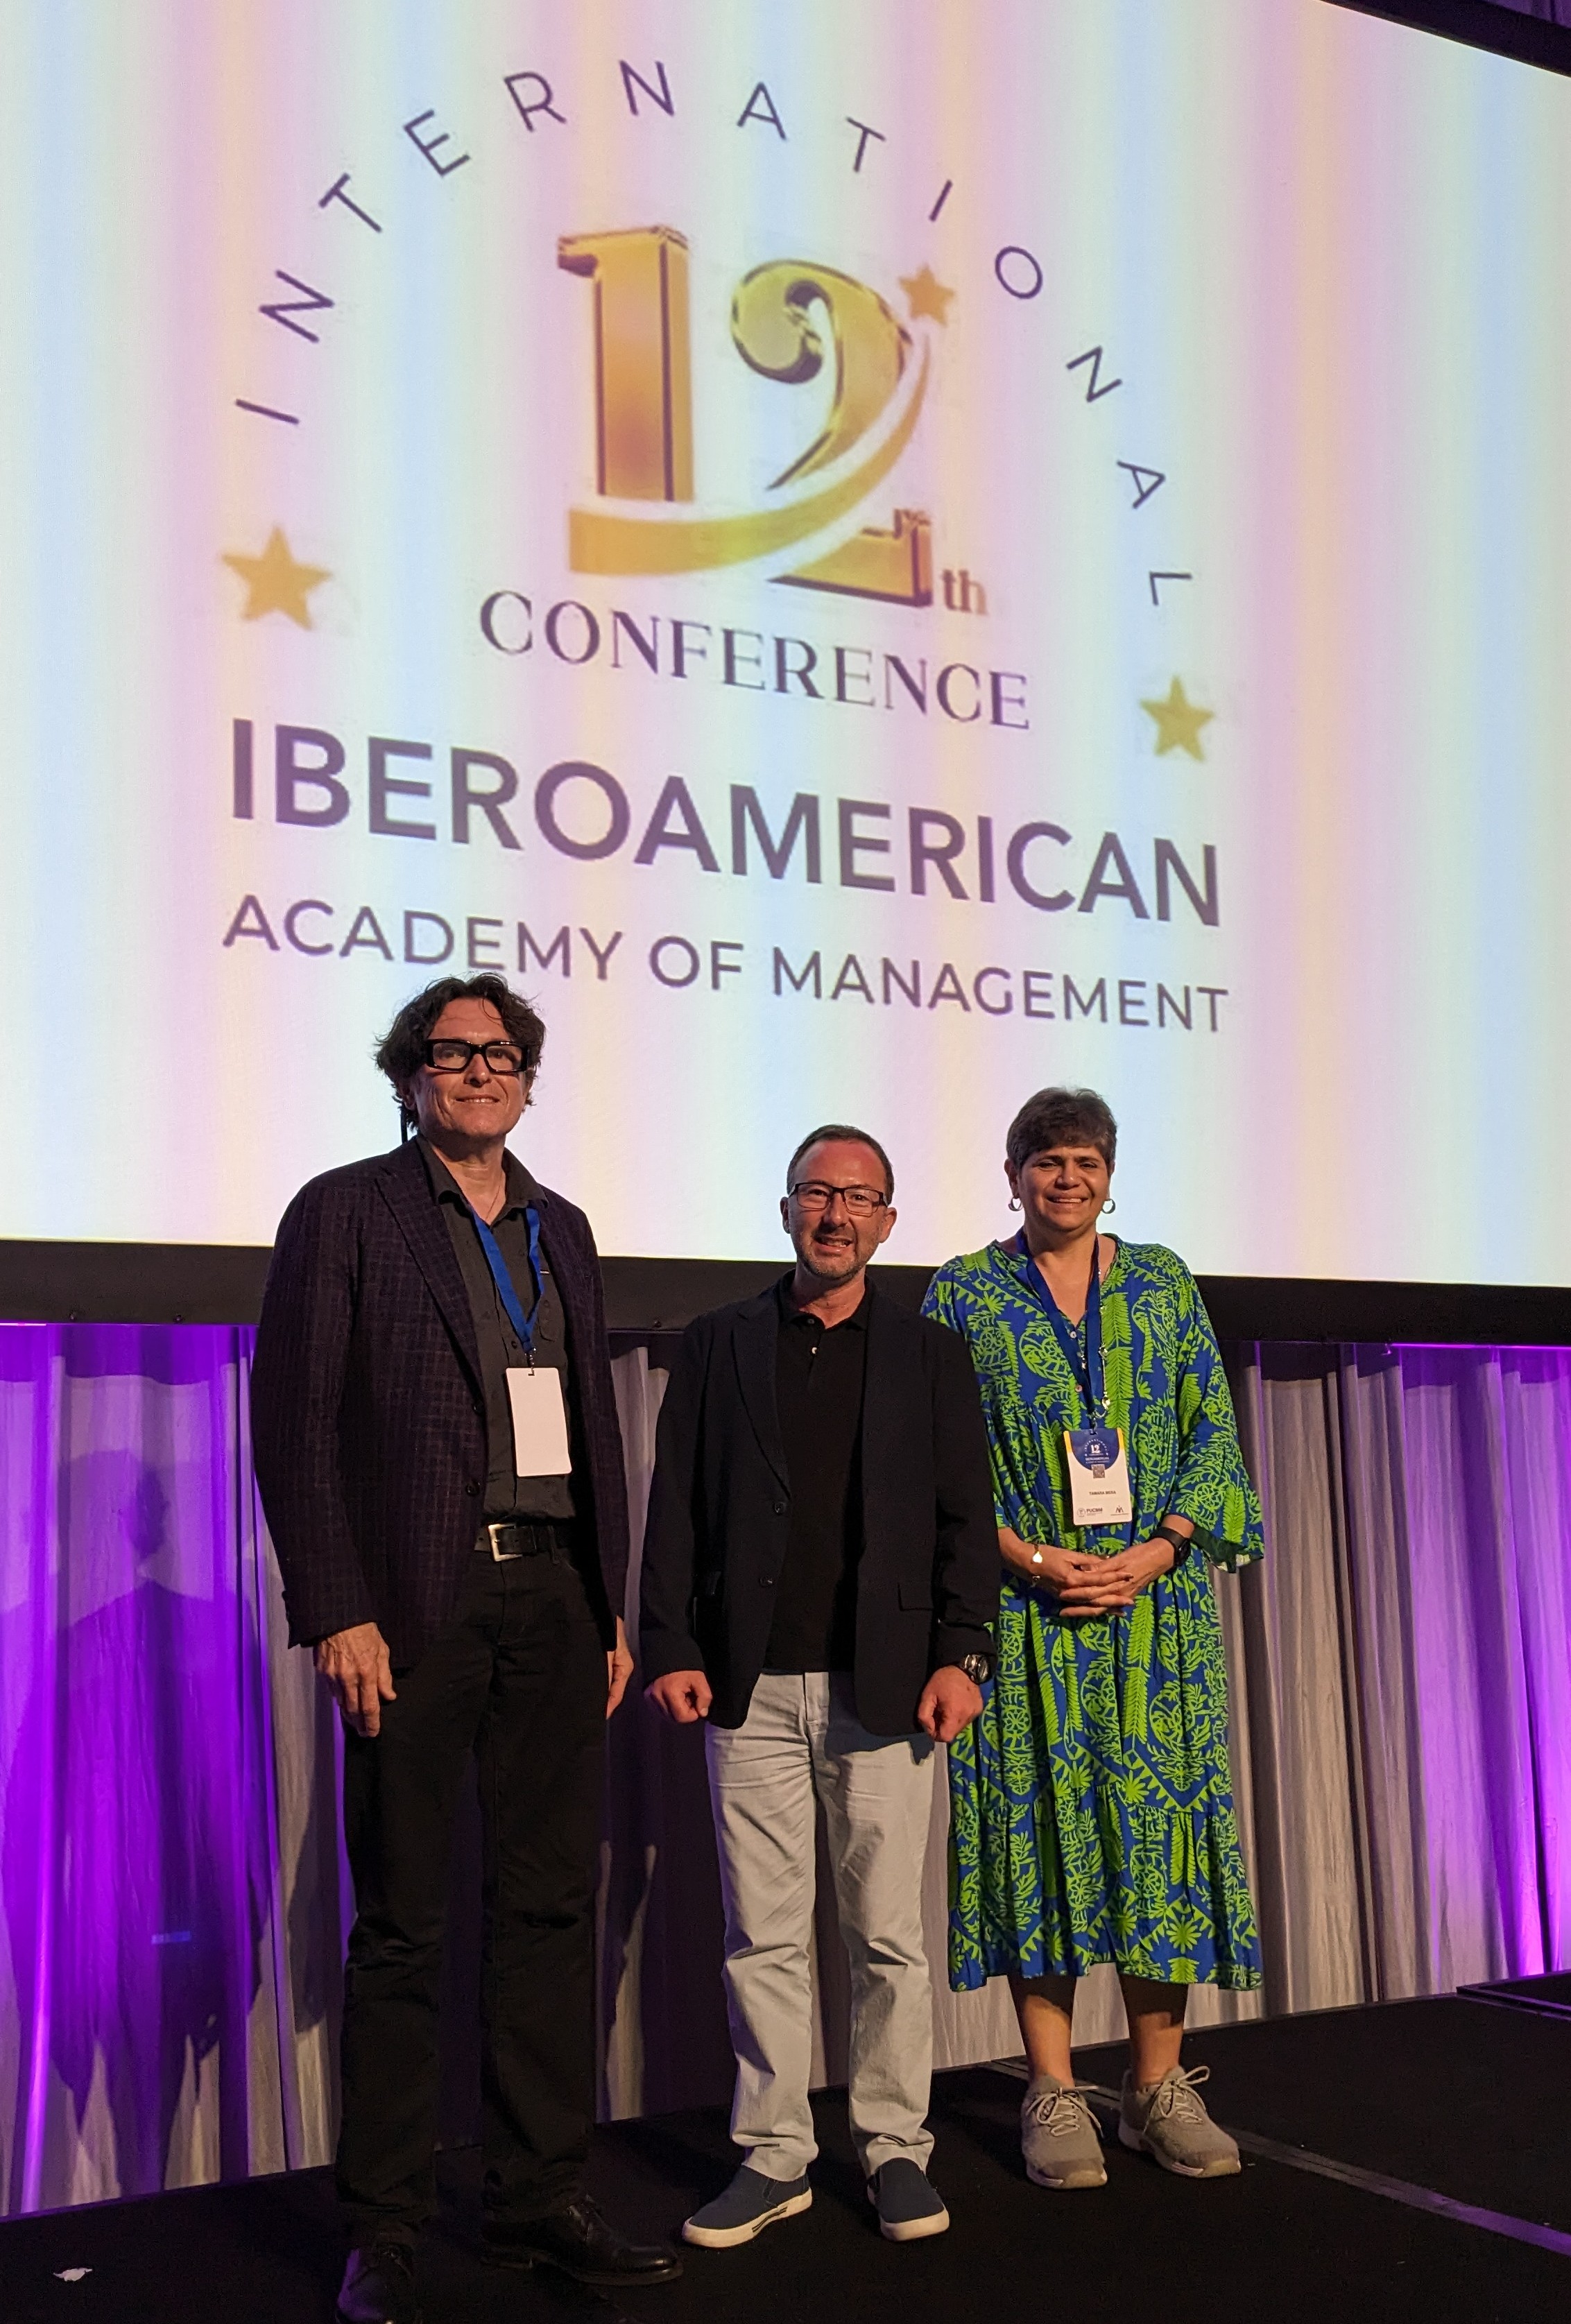 Christian Felzensztein stands between two presenters on stage in front of a screen with the logo for the 12th conference of the International Iberoamerican Academy of Management. 